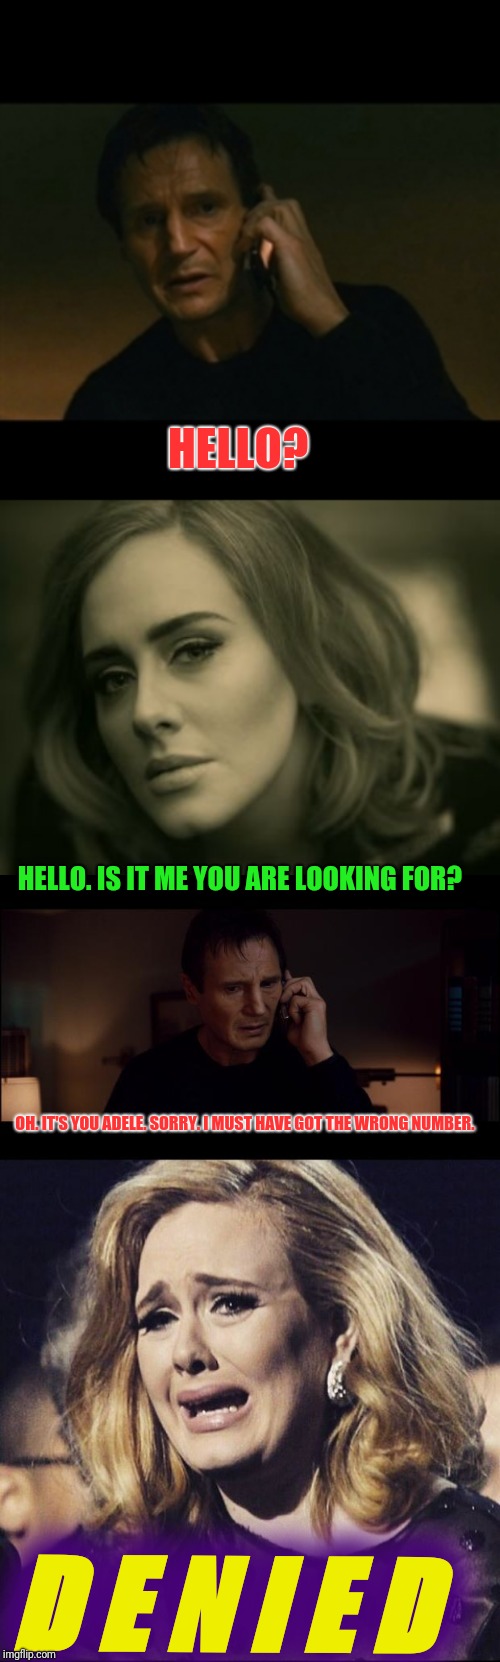 Hello from the other side (of ImgFlip)  | HELLO? HELLO. IS IT ME YOU ARE LOOKING FOR? OH. IT'S YOU ADELE. SORRY. I MUST HAVE GOT THE WRONG NUMBER. D E N I E D | image tagged in memes,liam neeson taken,adele - hello,denied | made w/ Imgflip meme maker